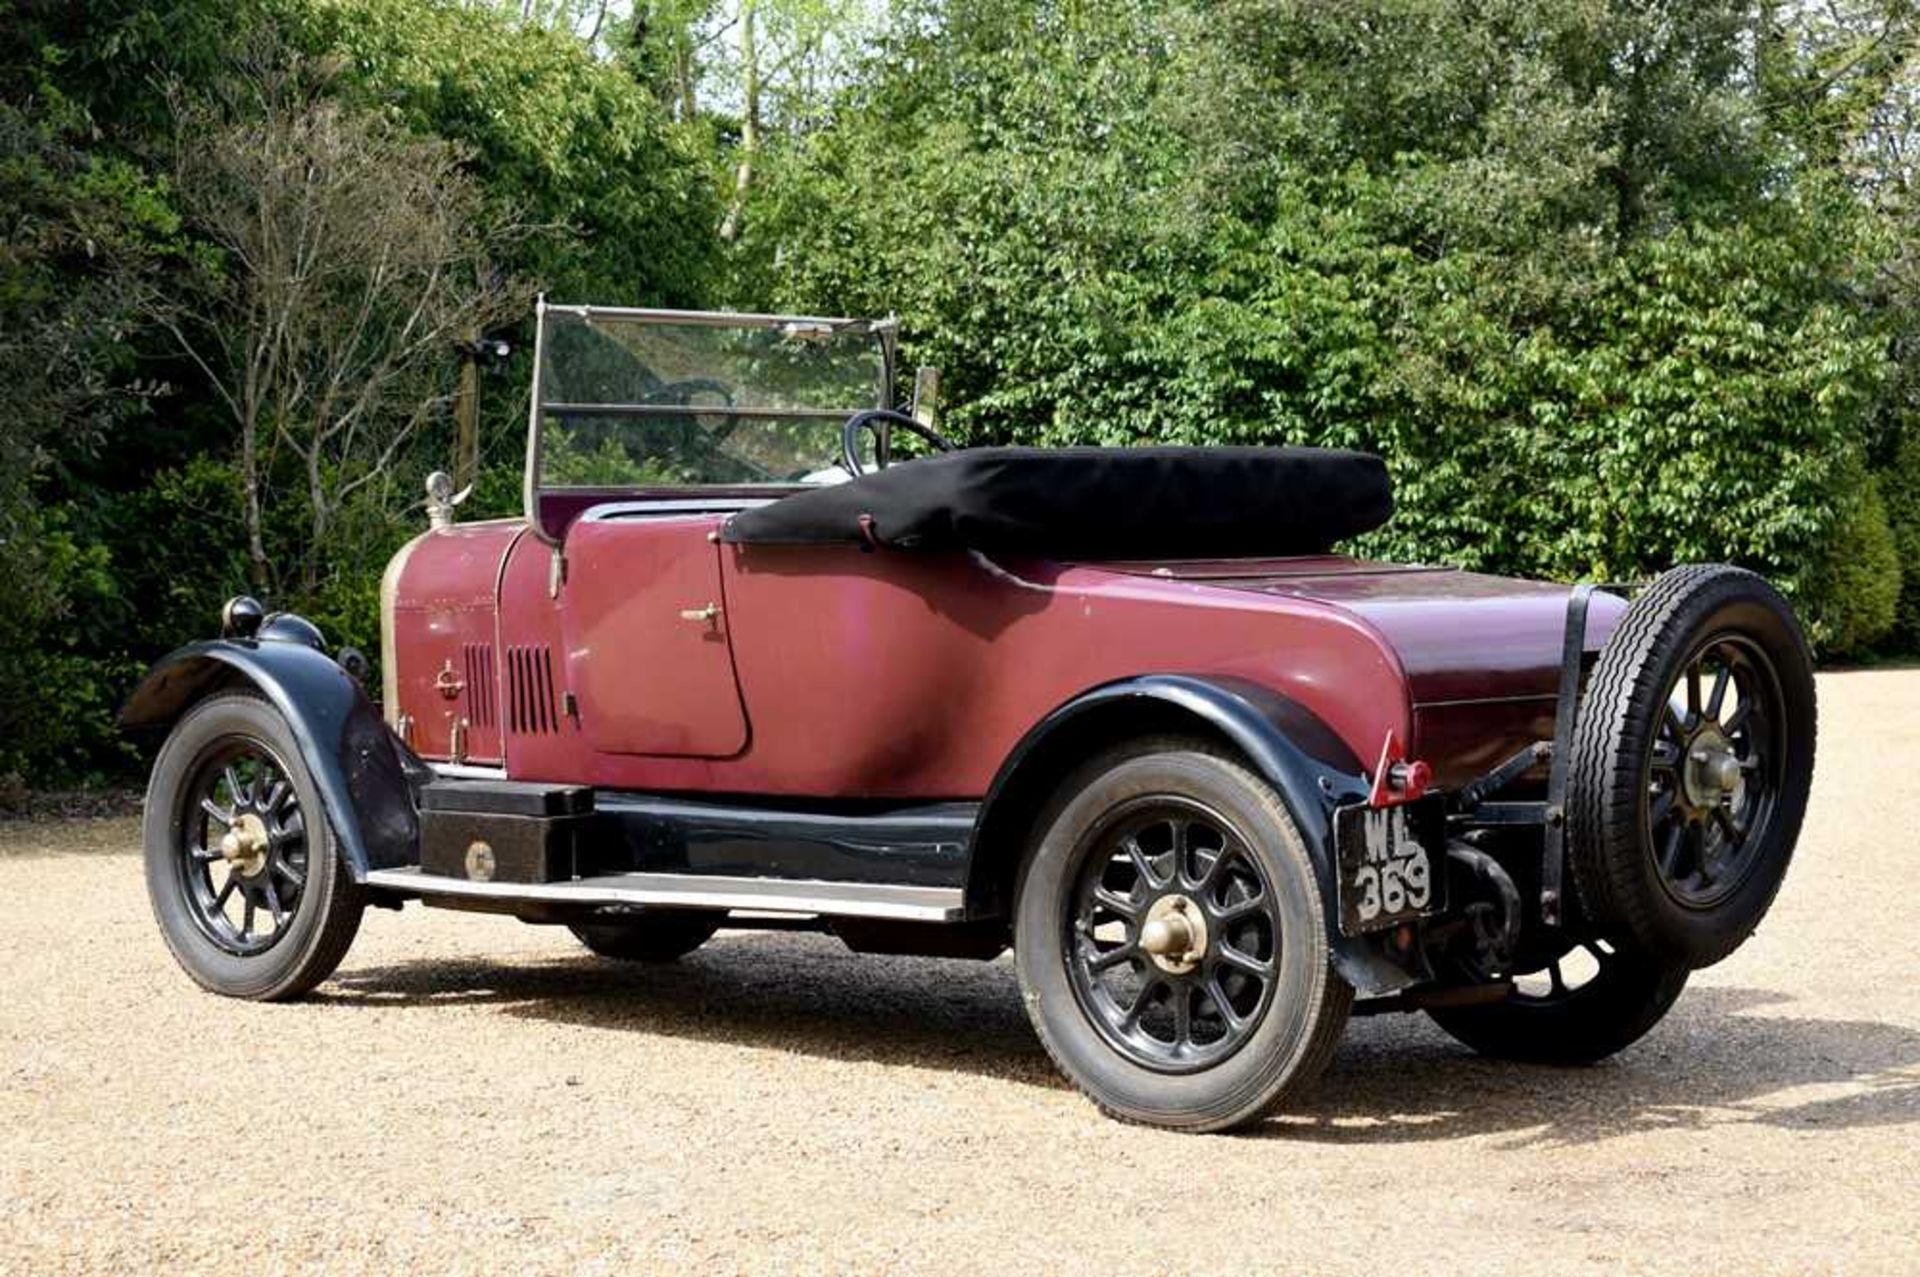 1926 Morris Oxford 'Bullnose' 2-Seat Tourer with Dickey - Image 18 of 99